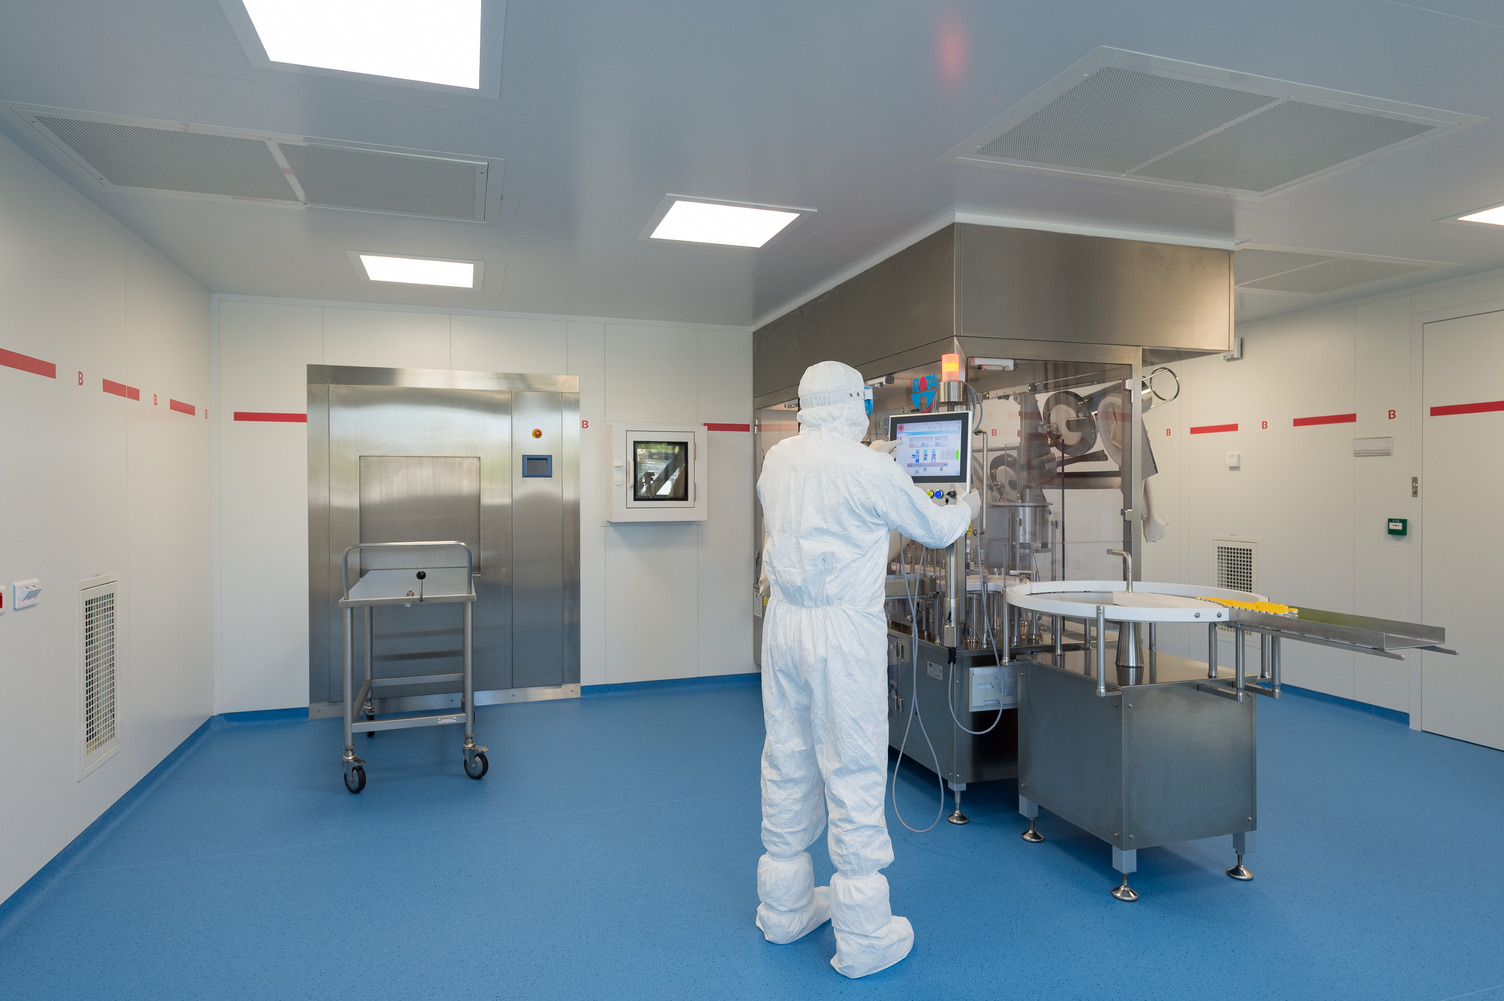 Selection criteria for cleanroom garments with the new Annex 1